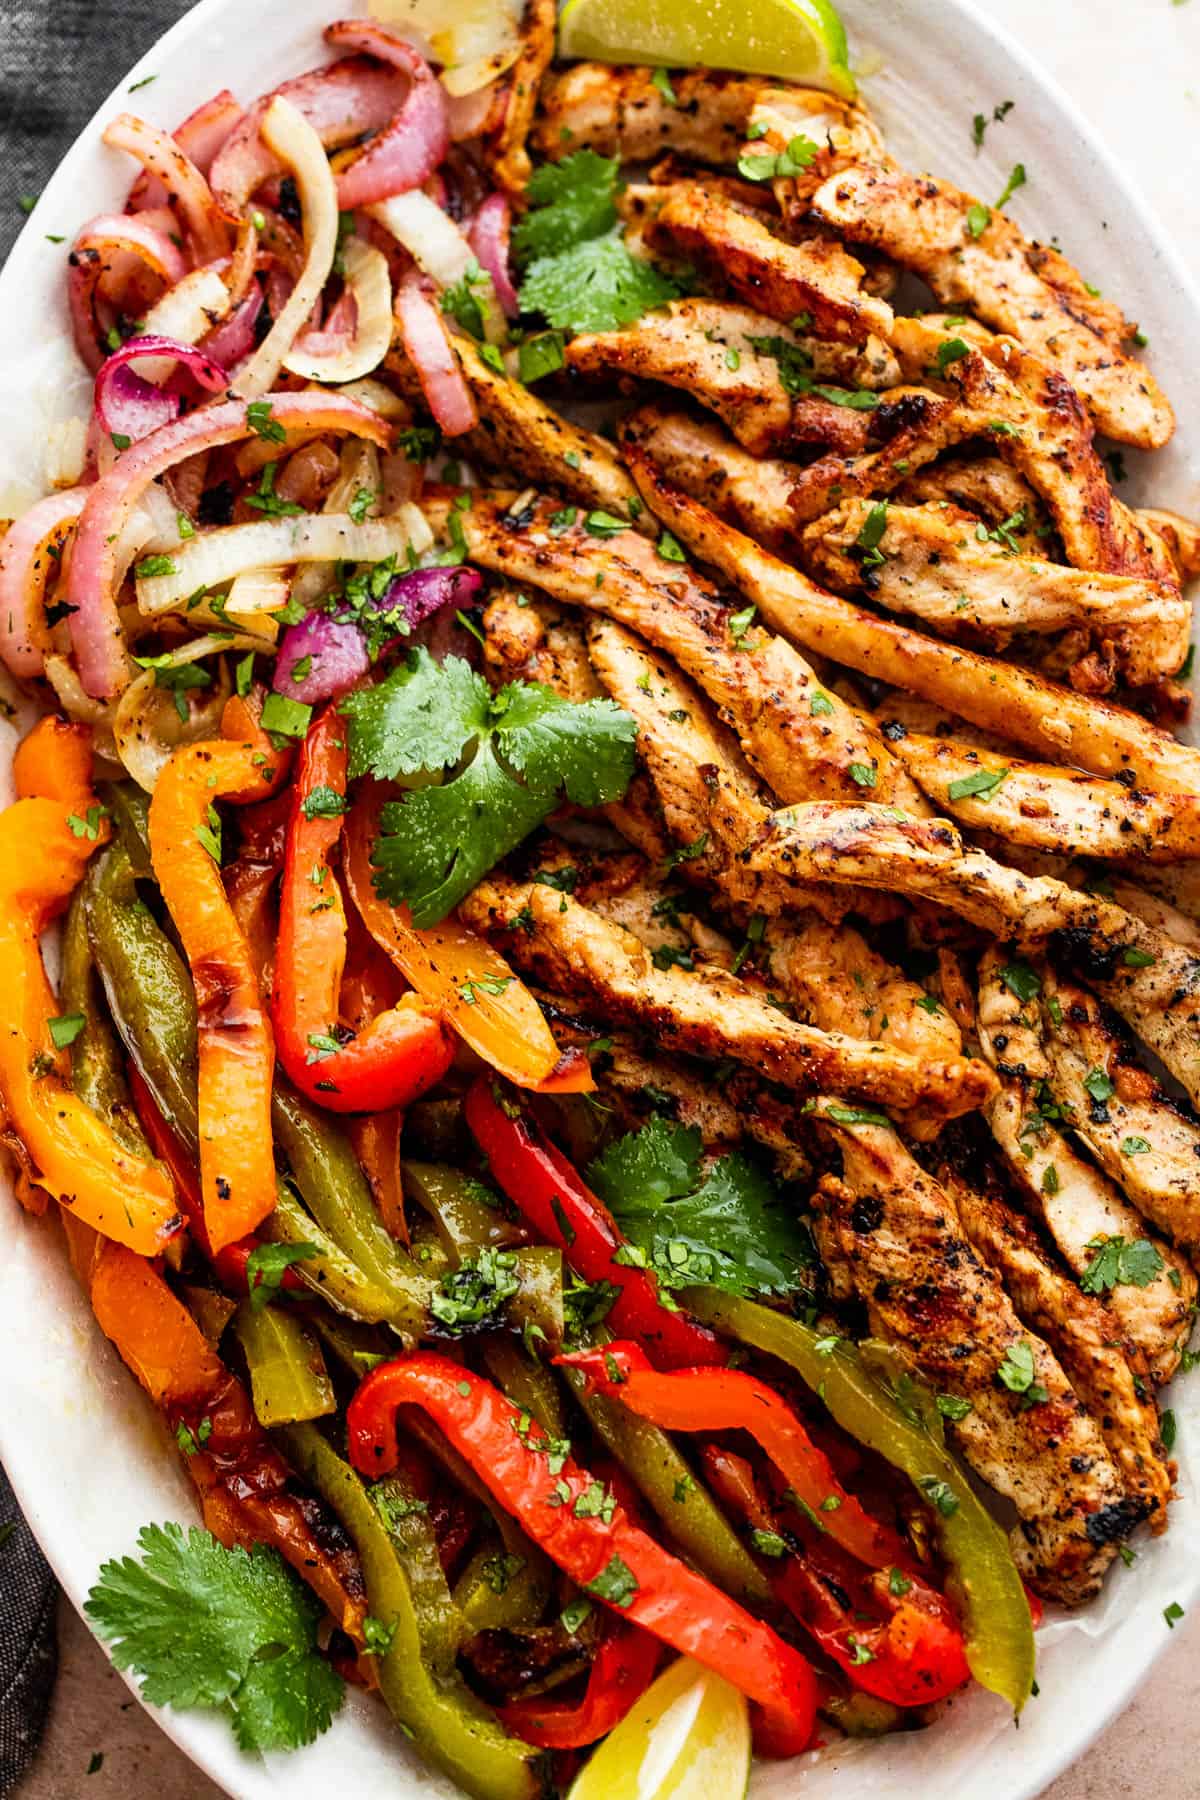 grilled chicken strips, colorful bell pepper strips, and onions on a serving plate garnished with cilantro leaves